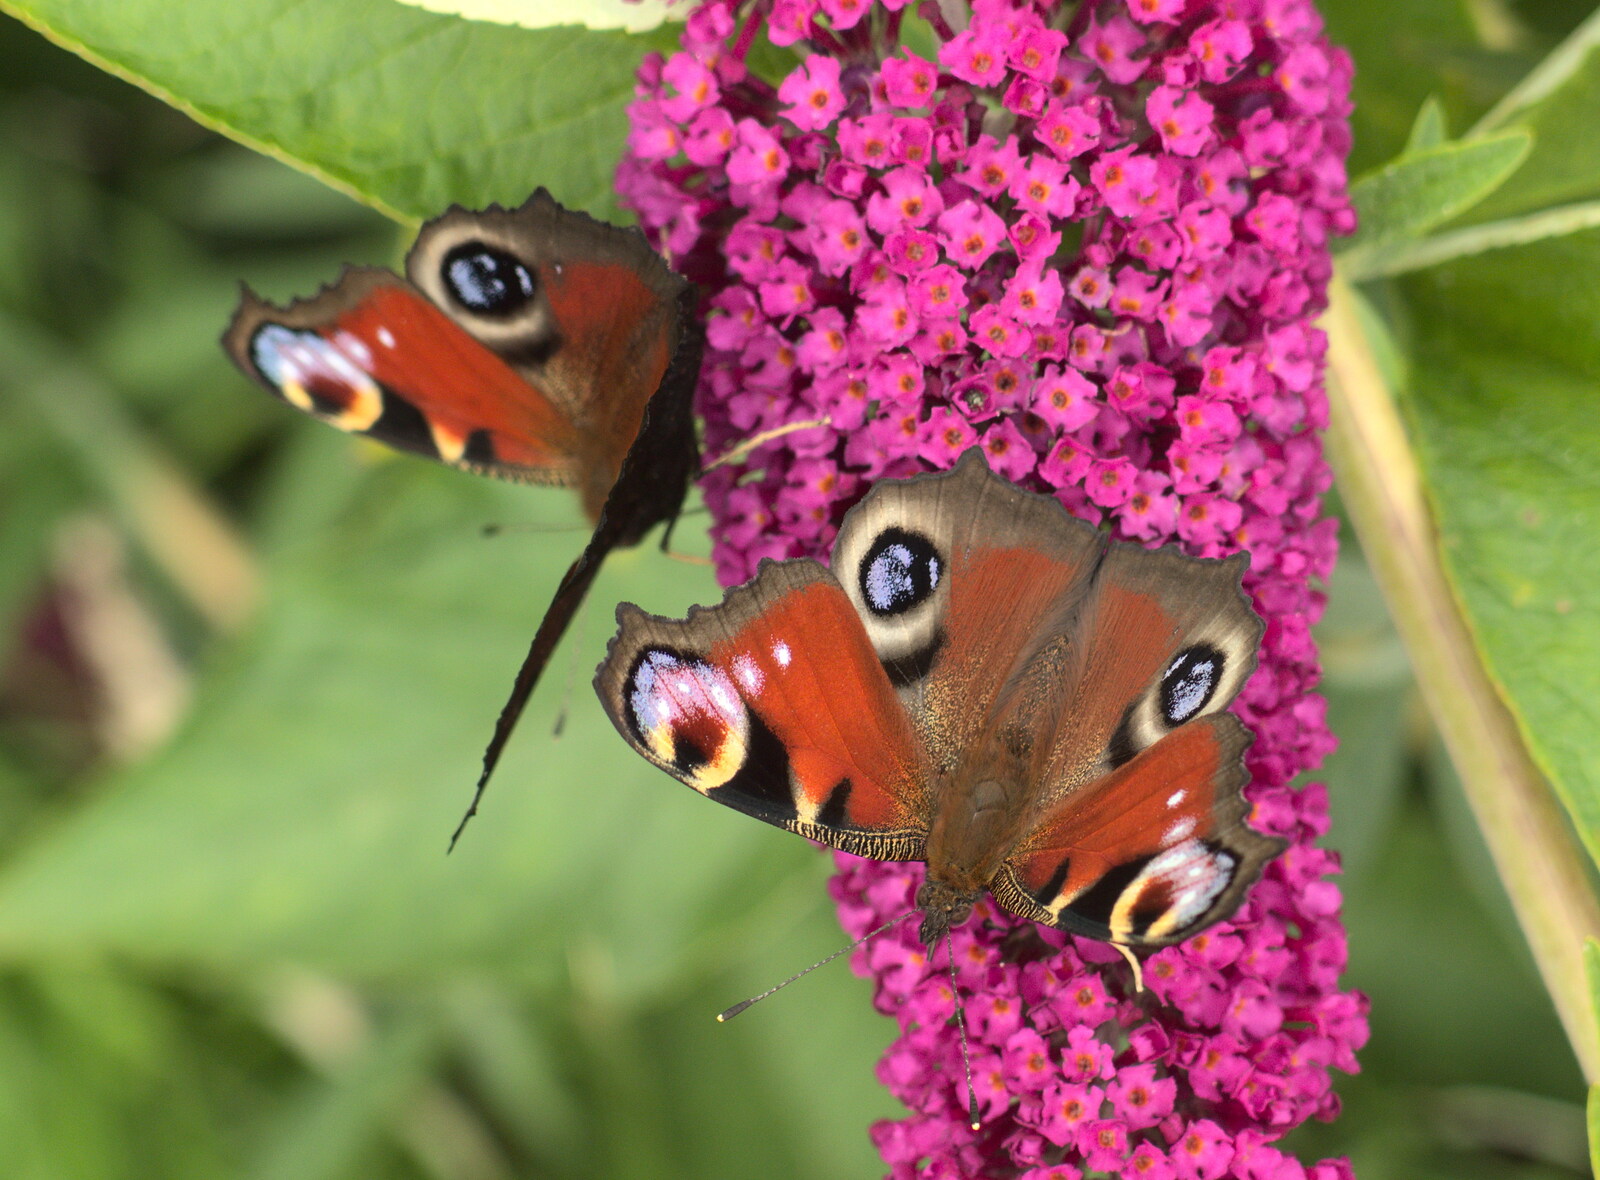 The buddleia at Diss is heaving with butterflies from The BSCC at Harleston, and a Visit From Cambridge, Brome, Suffolk - 31st July 2014